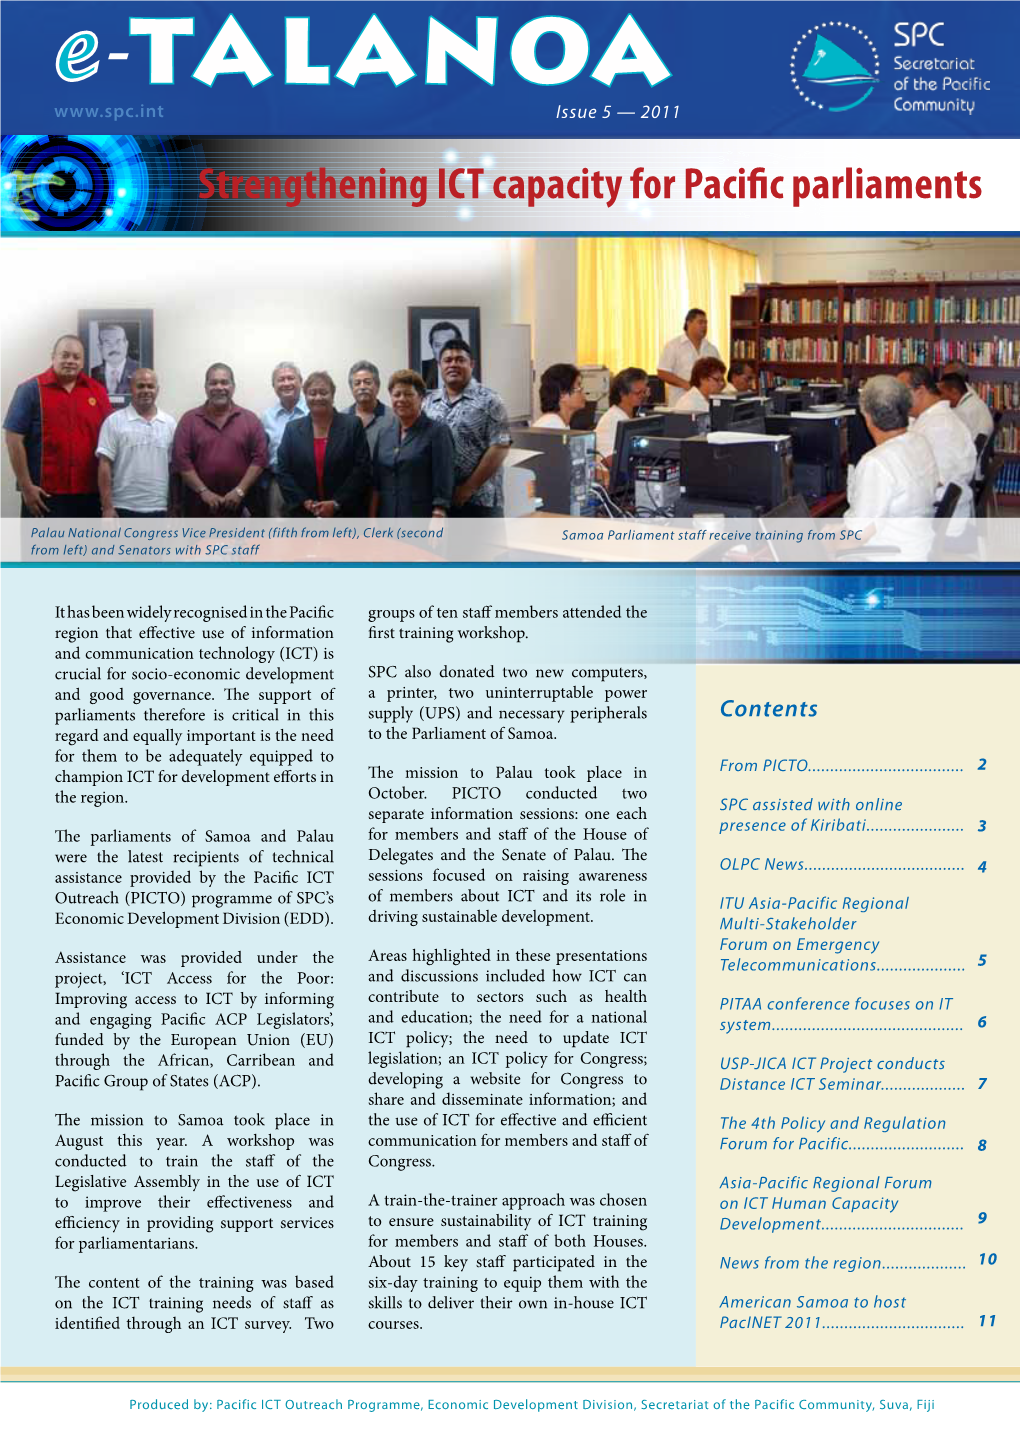 E-TALANOA Issue 5 — 2011 Strengthening ICT Capacity for Pacific Parliaments